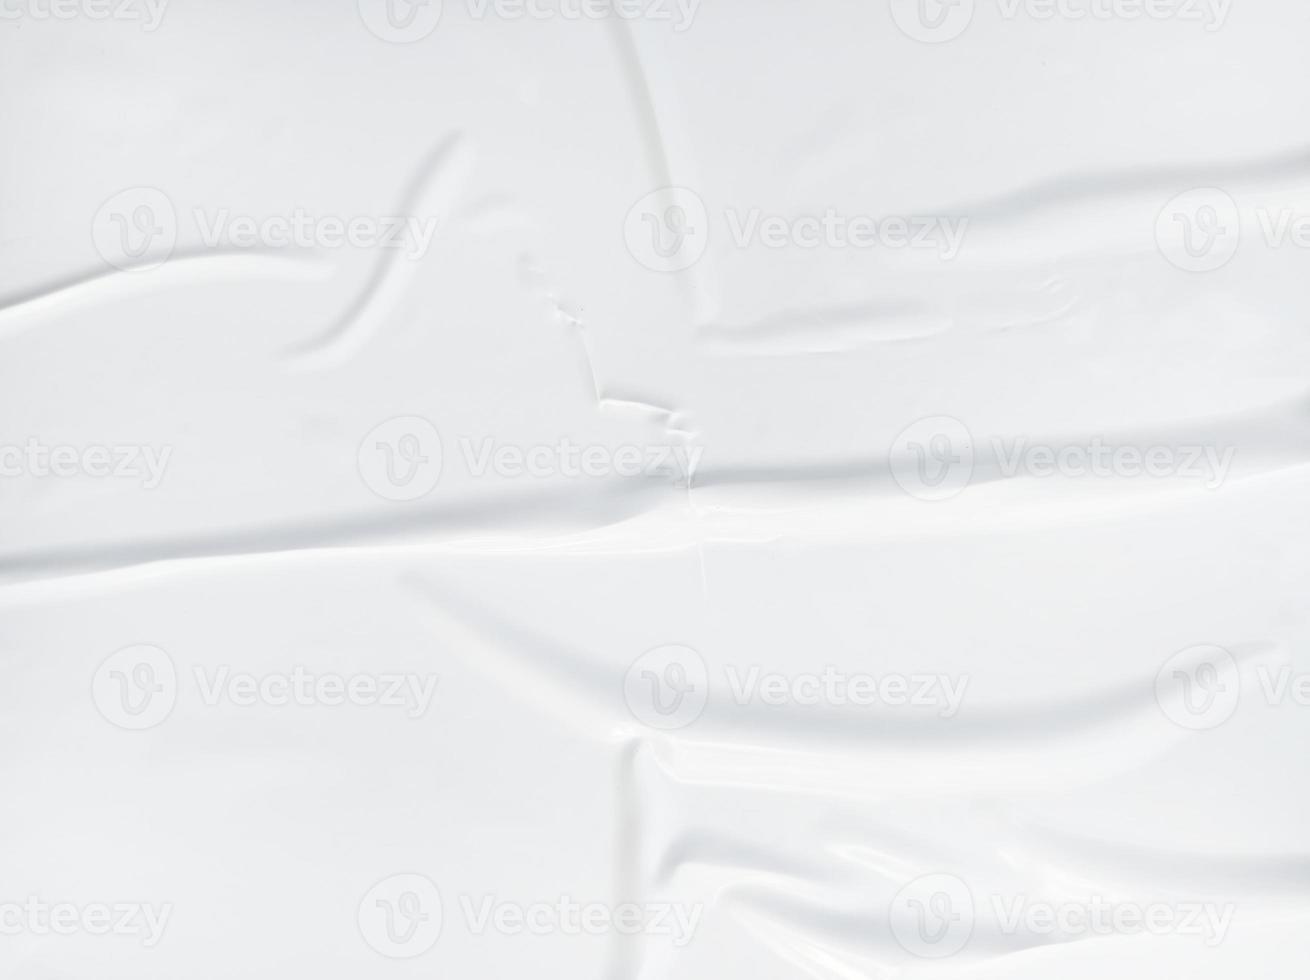 Wrinkled paper texture. Crumpled paper texture background for various ...